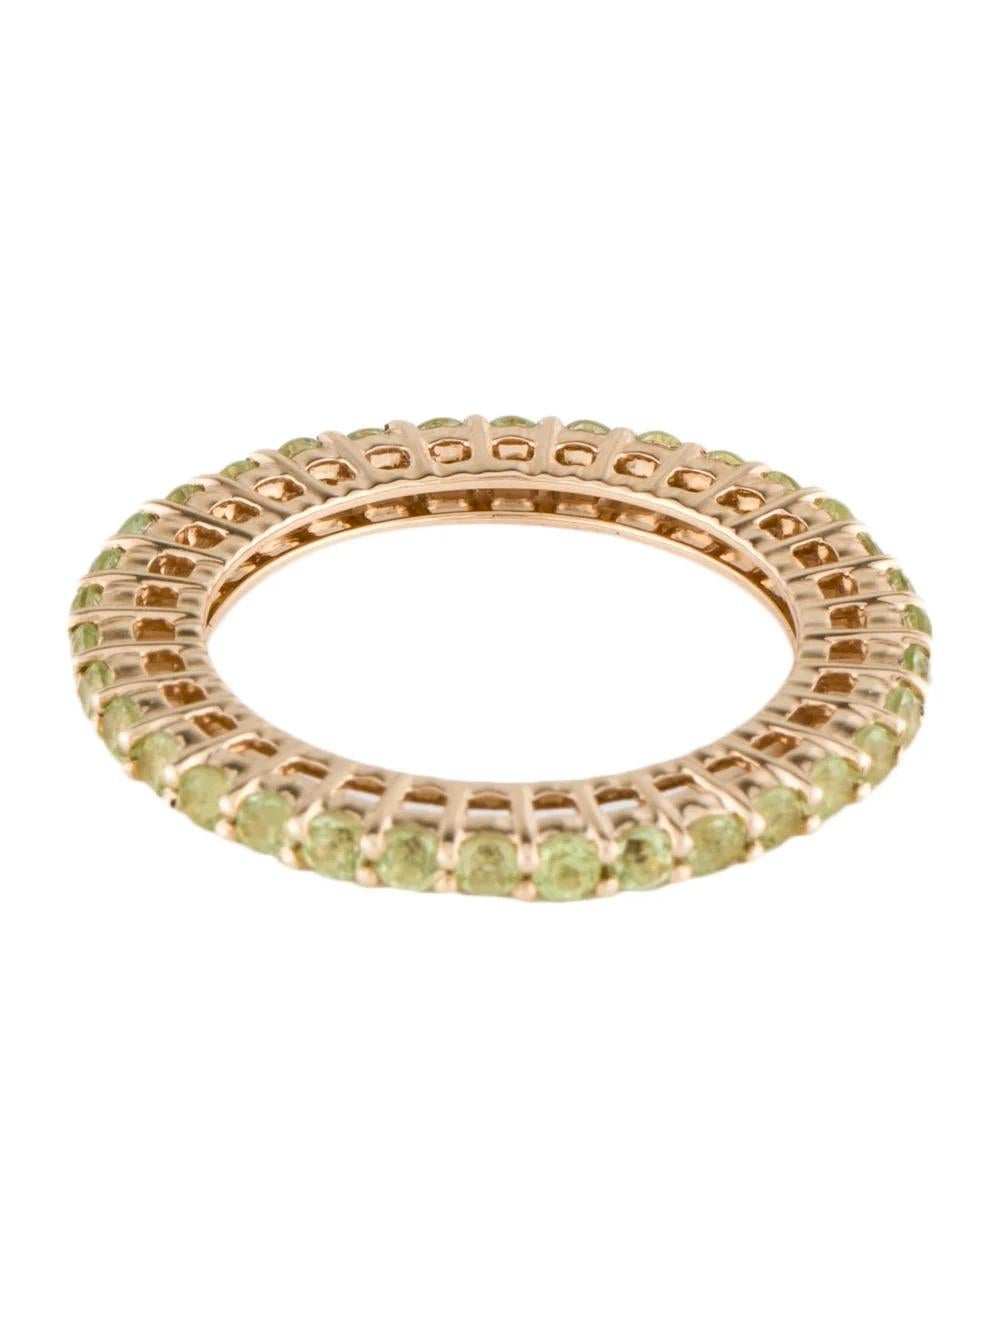 Vintage 14K Peridot Eternity Band Ring Size 7 - Classic Style & Timeless Beauty In New Condition For Sale In Holtsville, NY